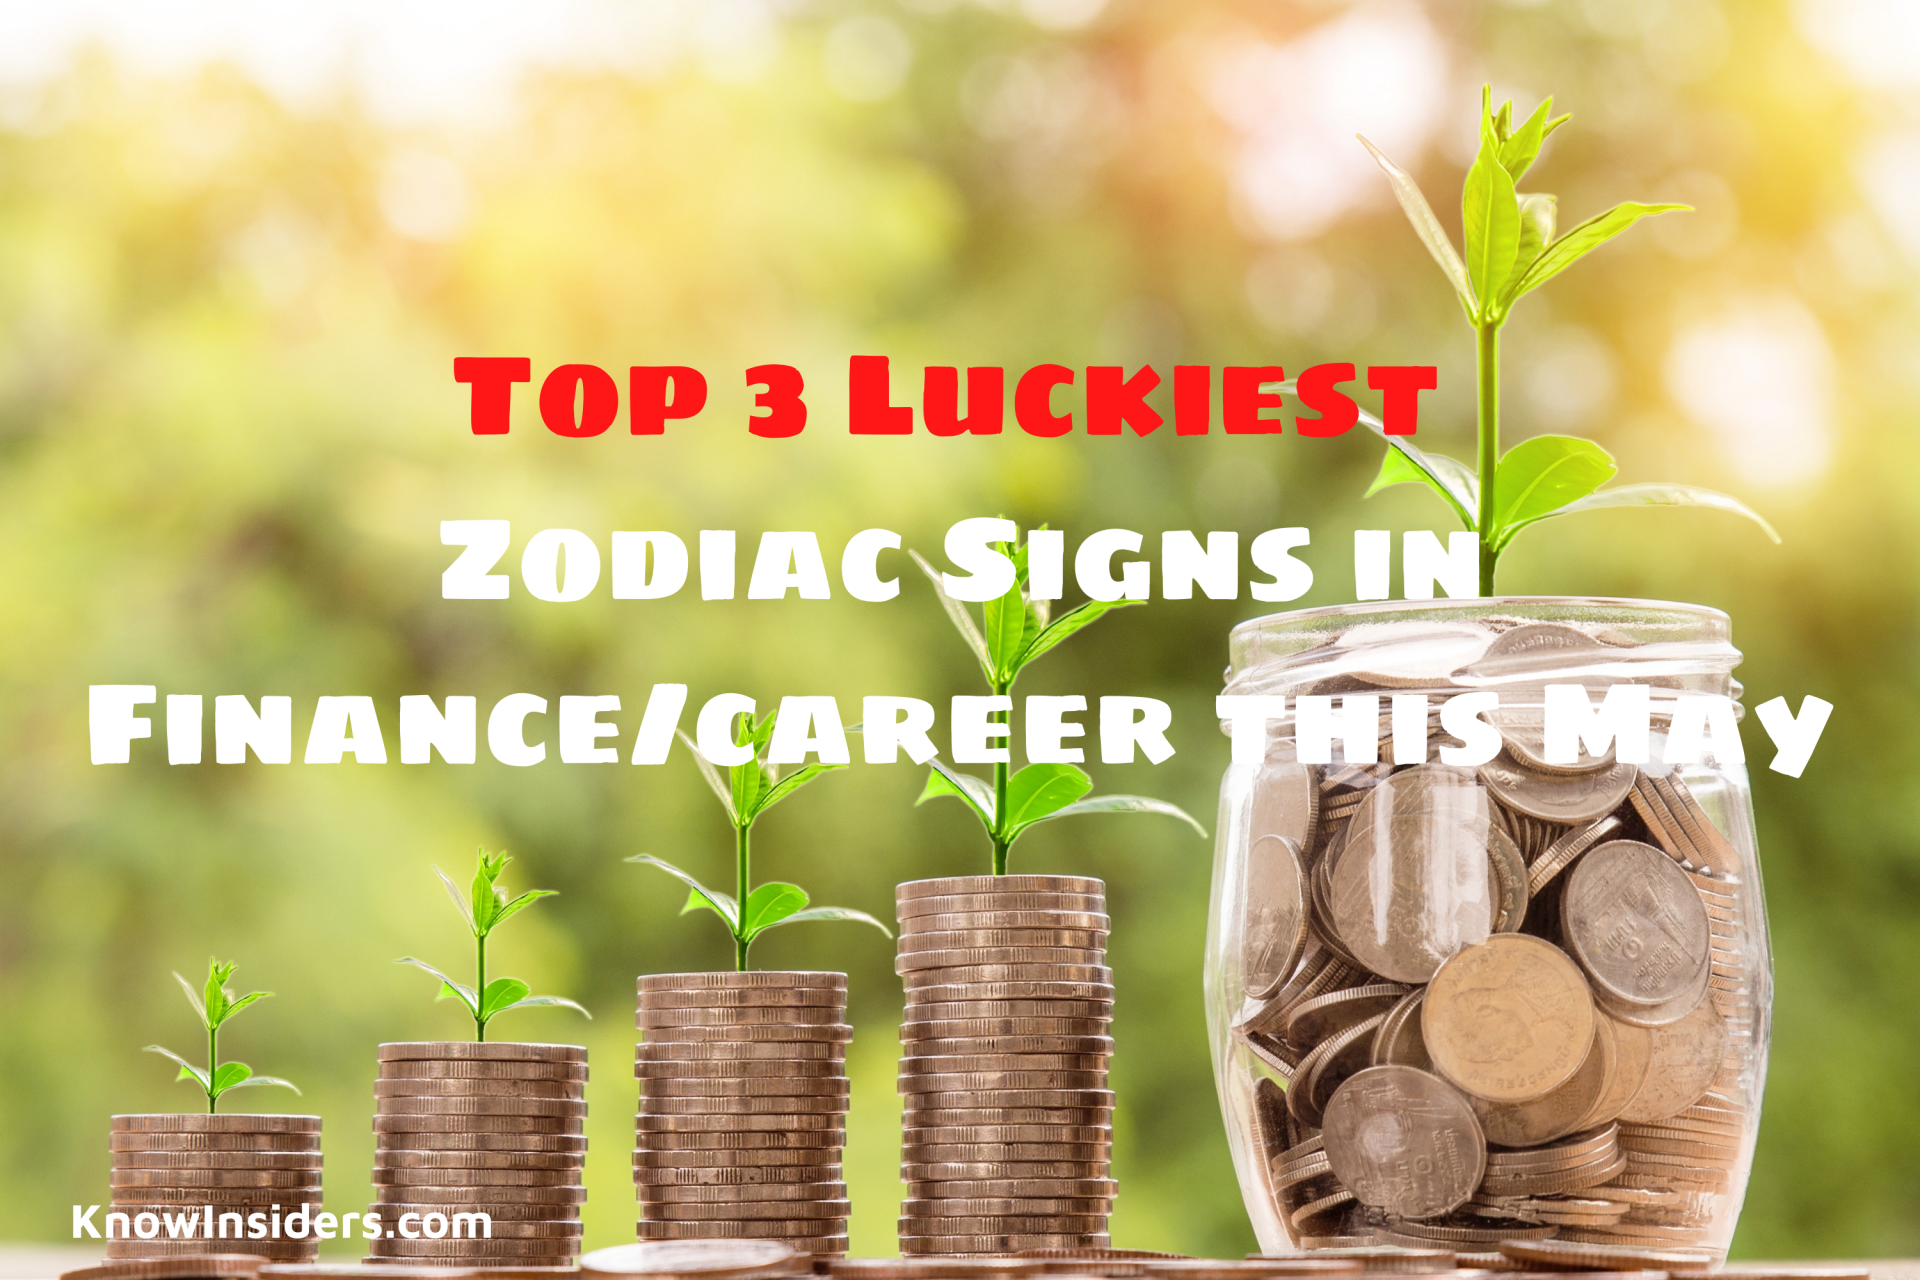 Top 3 Luckiest Zodiac Signs in Finance/Career this May